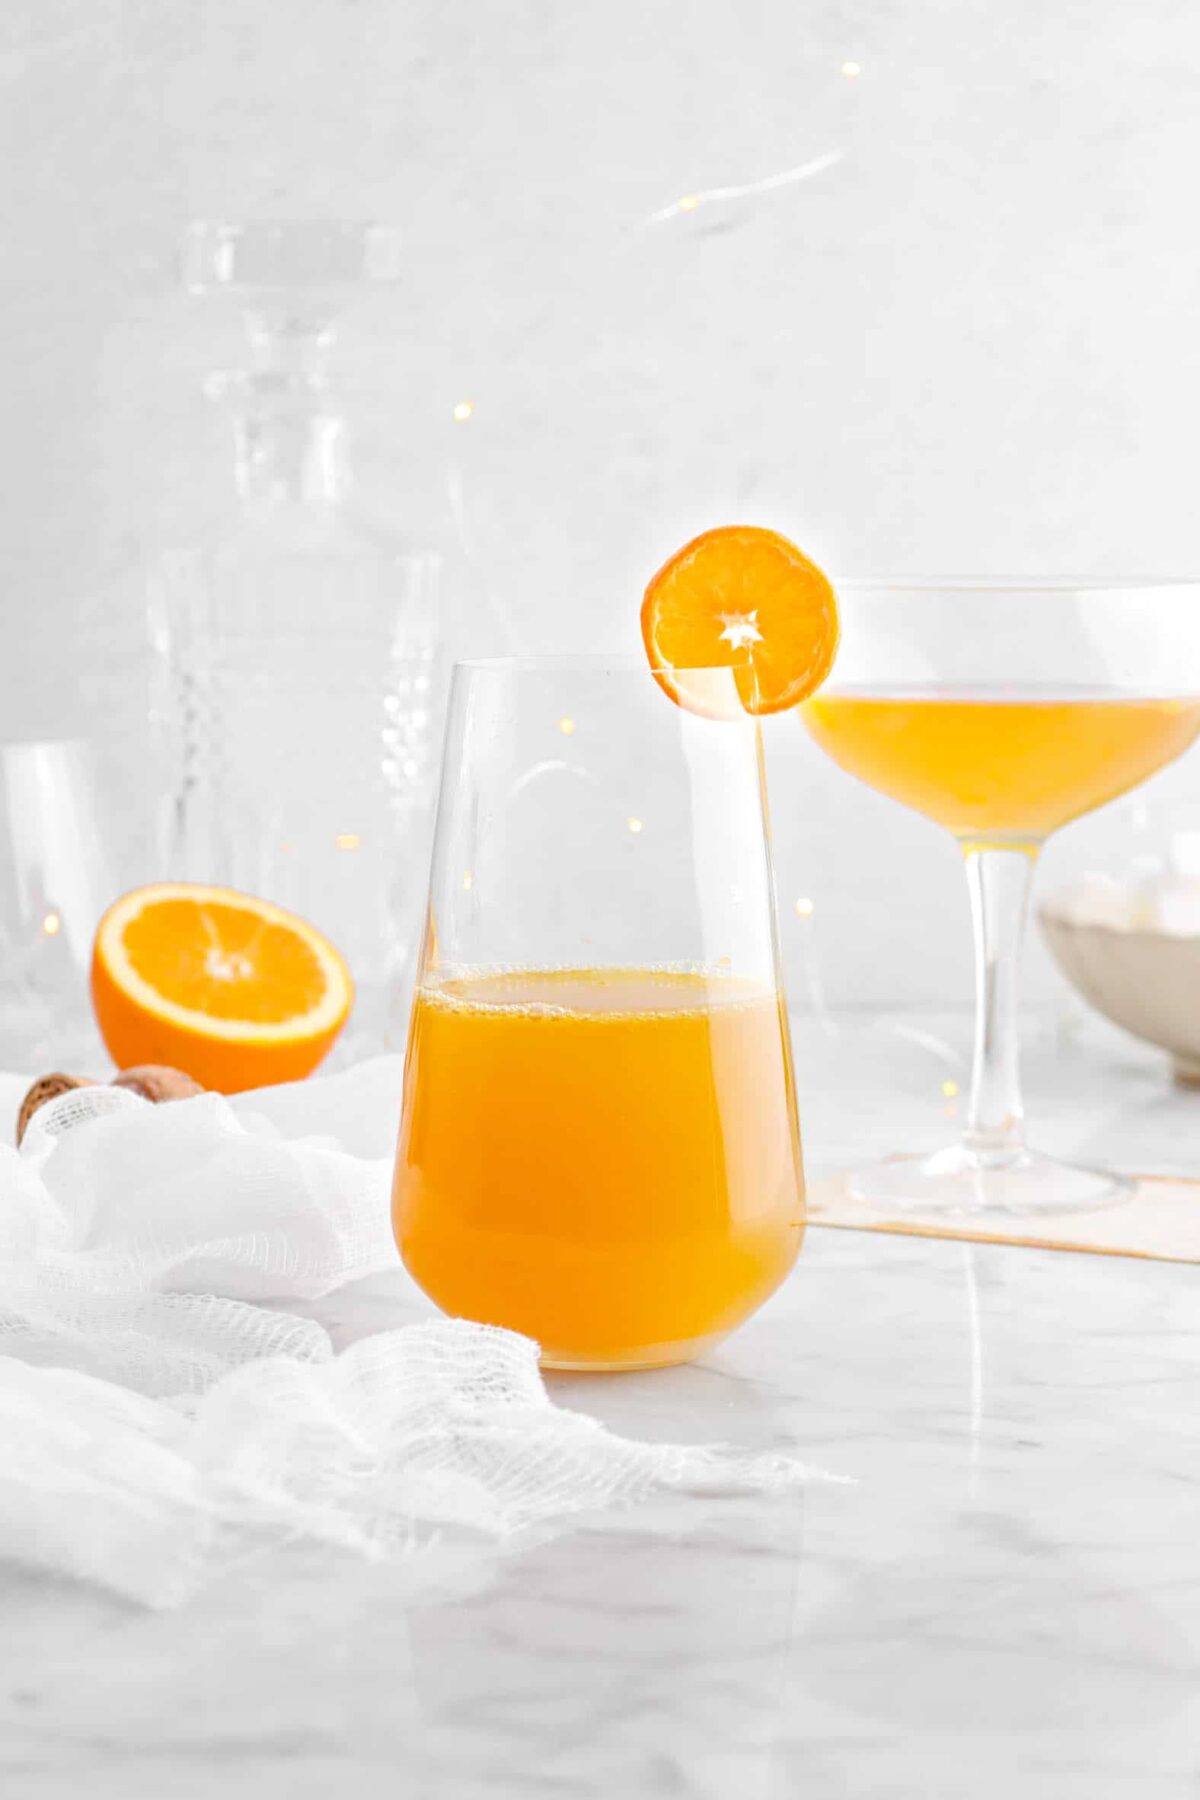 orange champagne cocktail with glass behind, half of an orange, and white cheese cloth